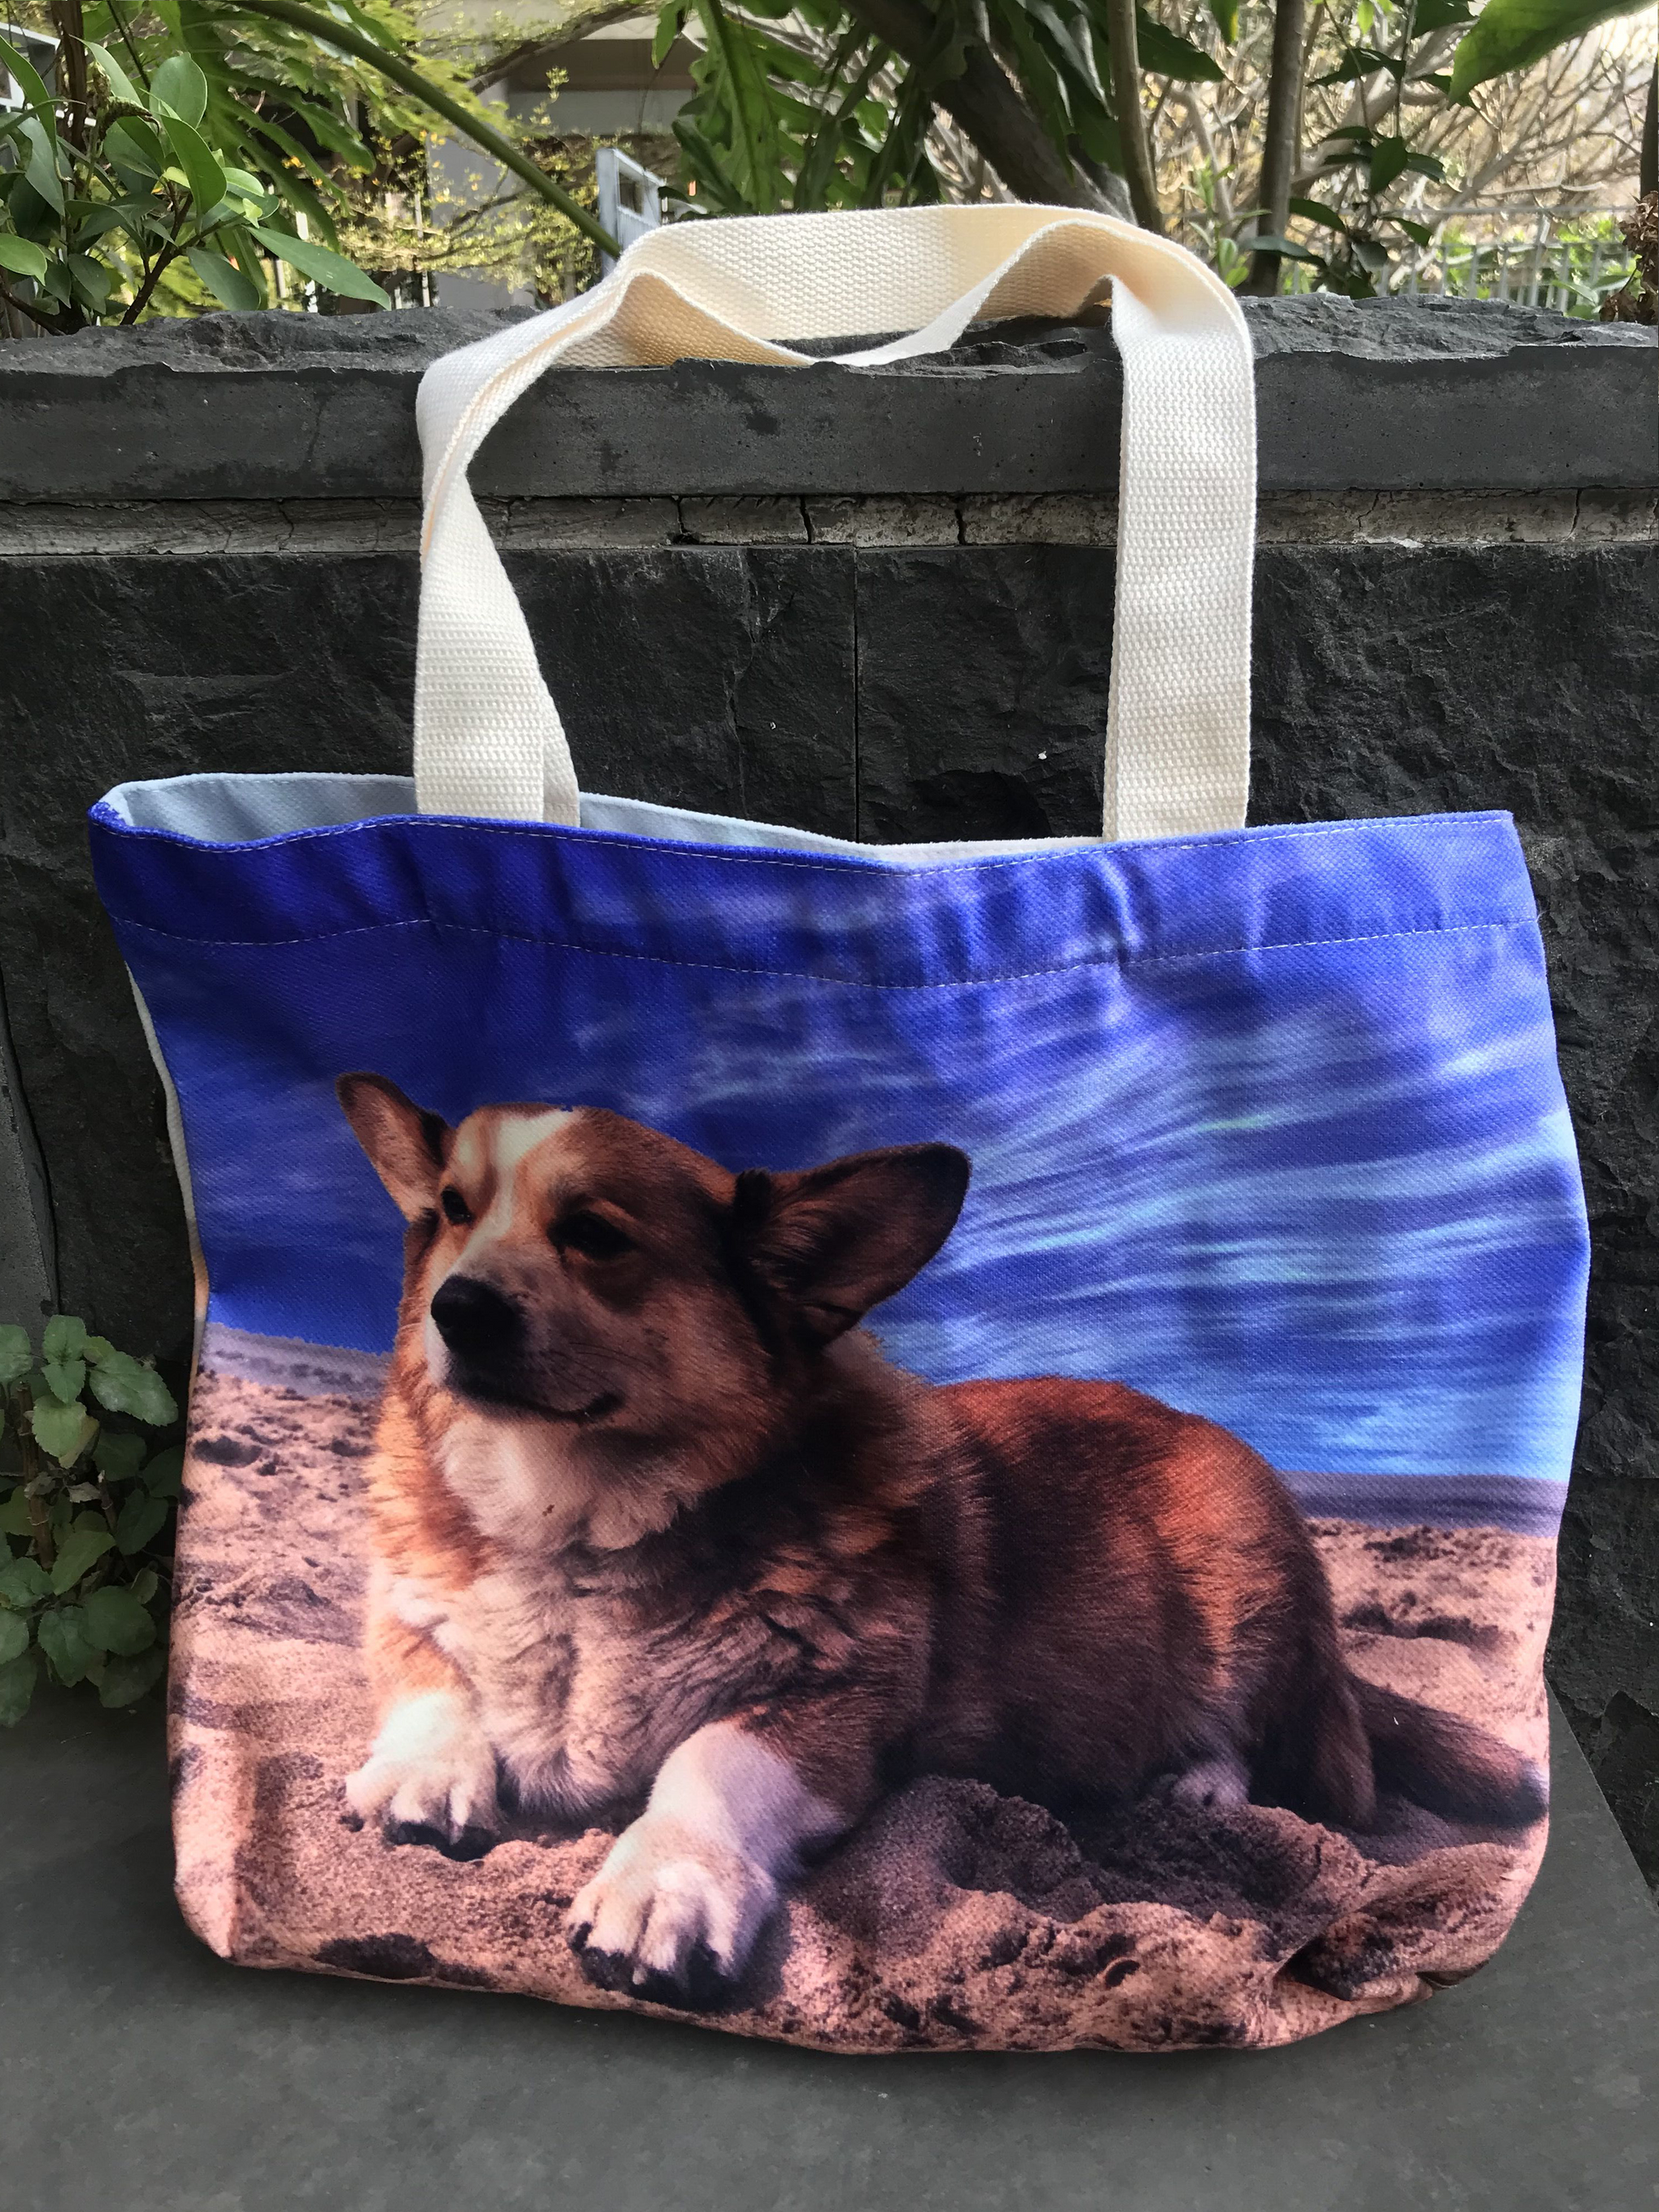 A all over print custom tote bag with a photo of a dog under the blue sky is a thoughtful and unique gift. The bag is large enough and perfect for daily.